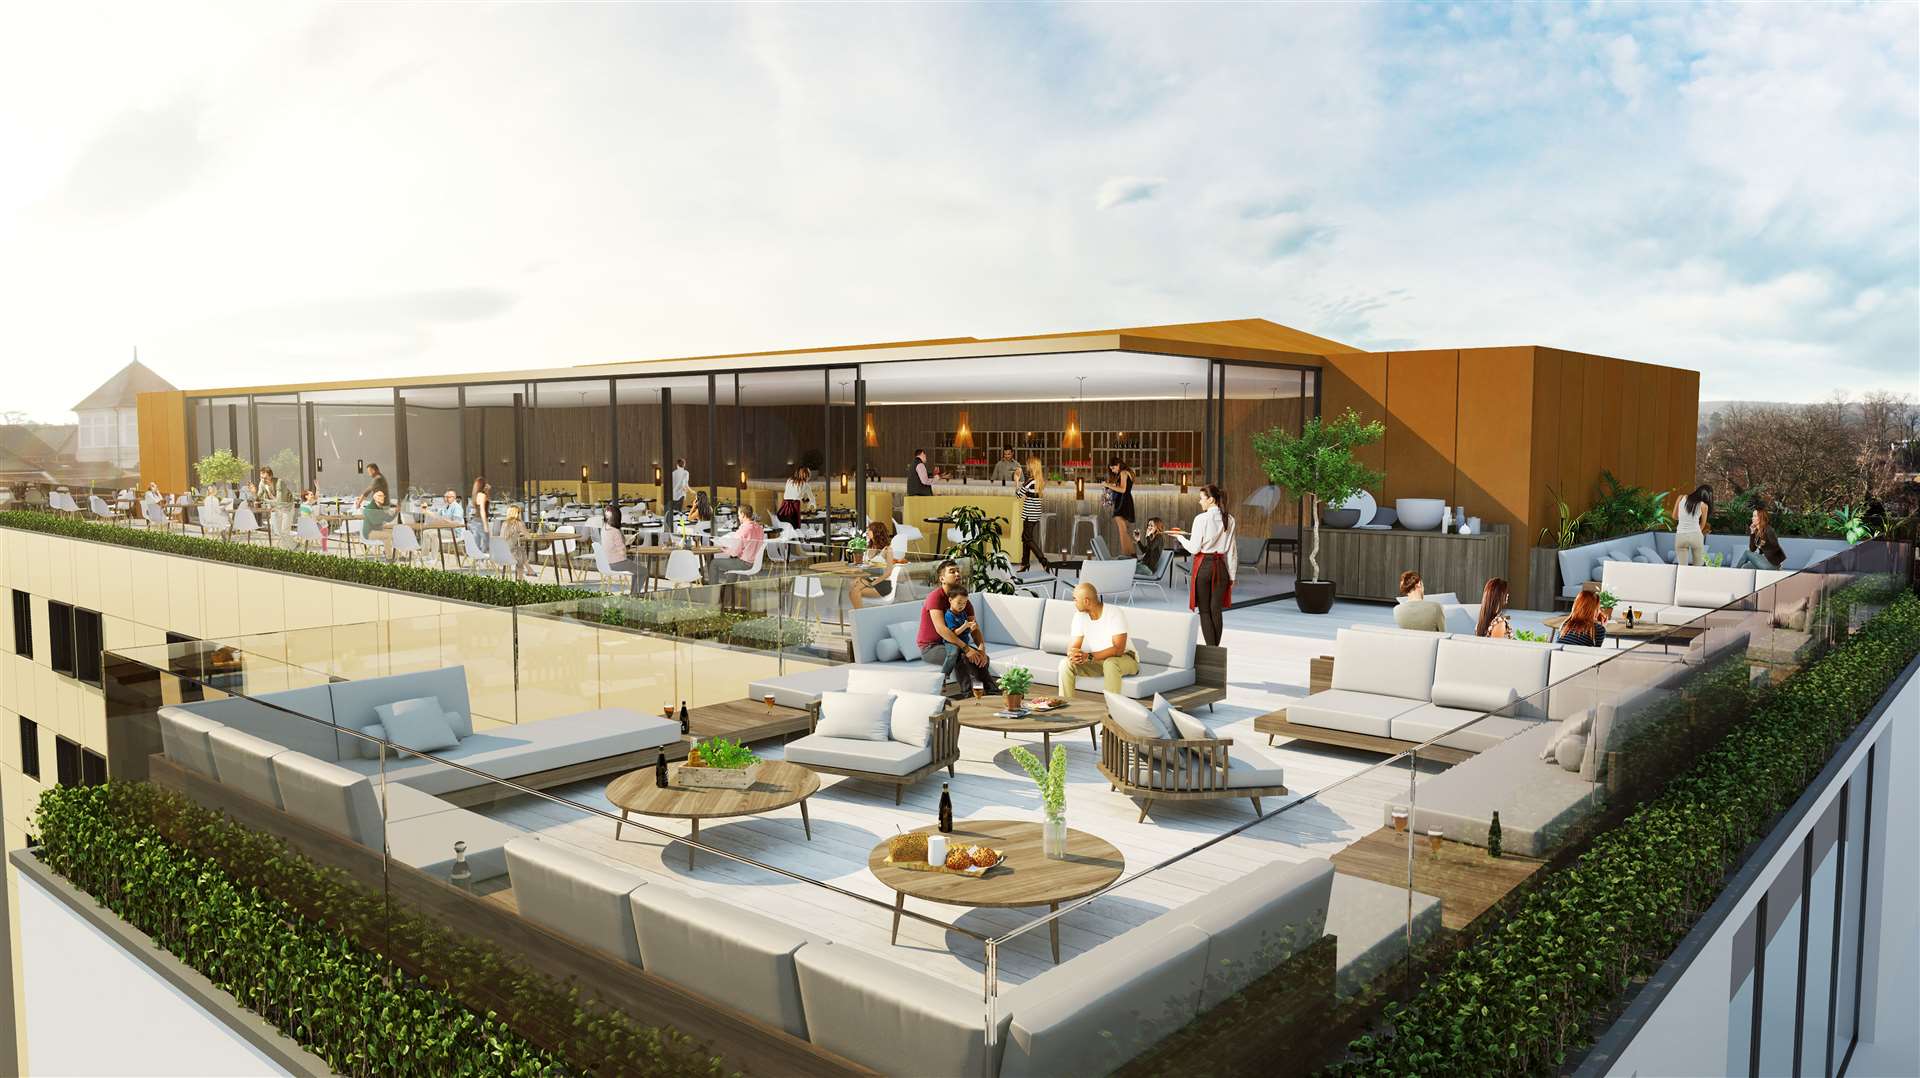 The rooftop restaurant is set to open at Easter